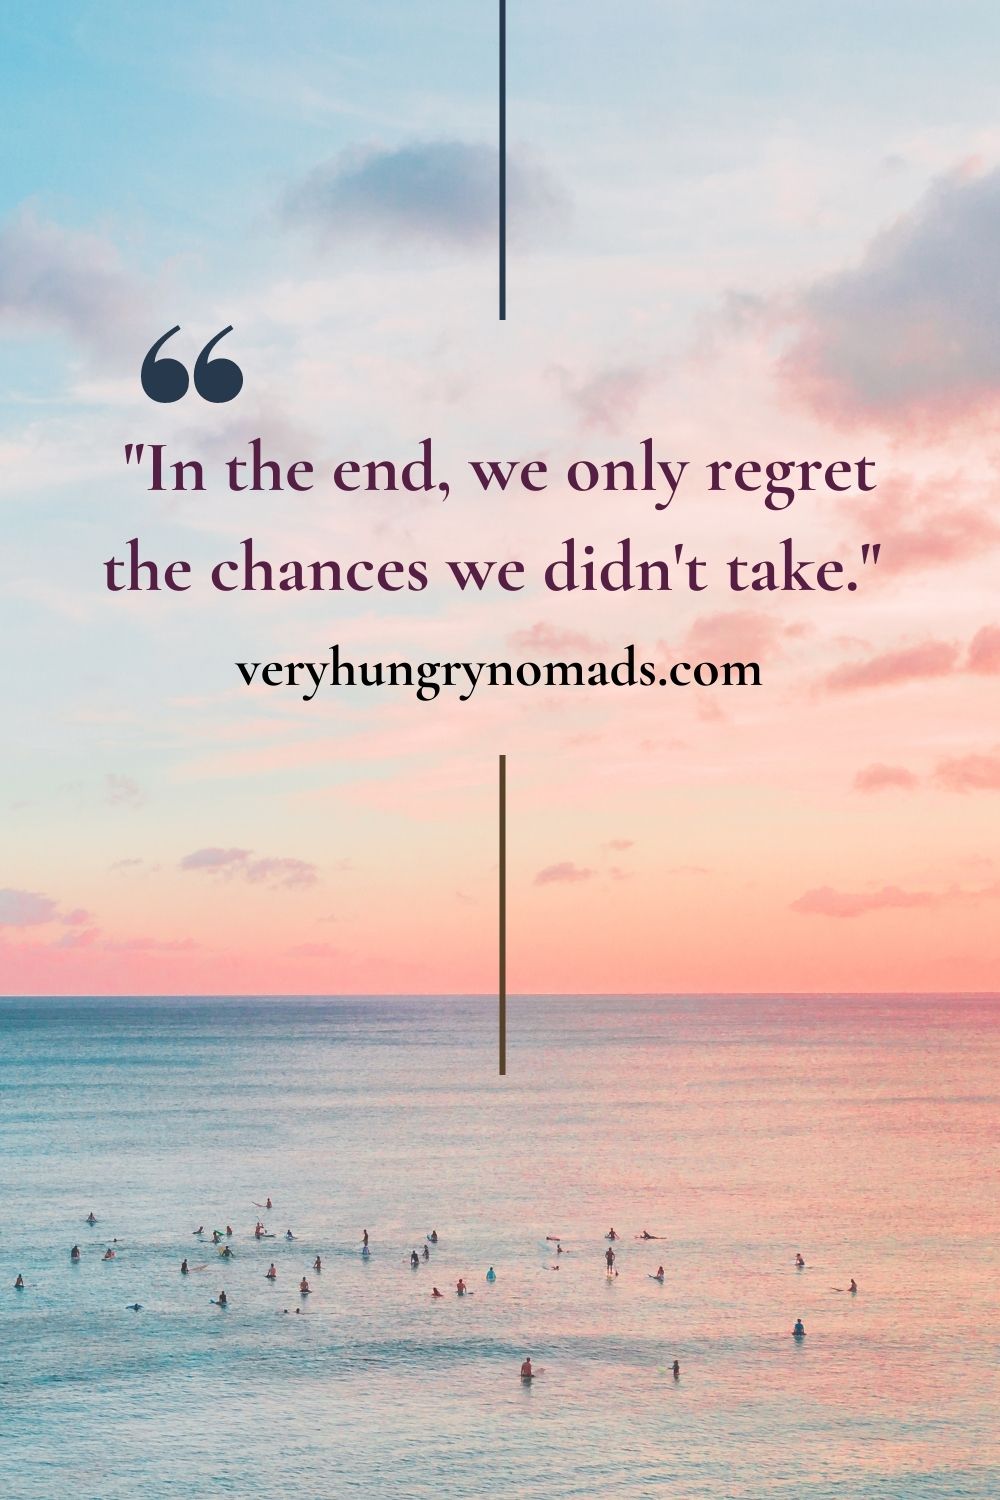 In the end, we only regret the chances we didn't take.